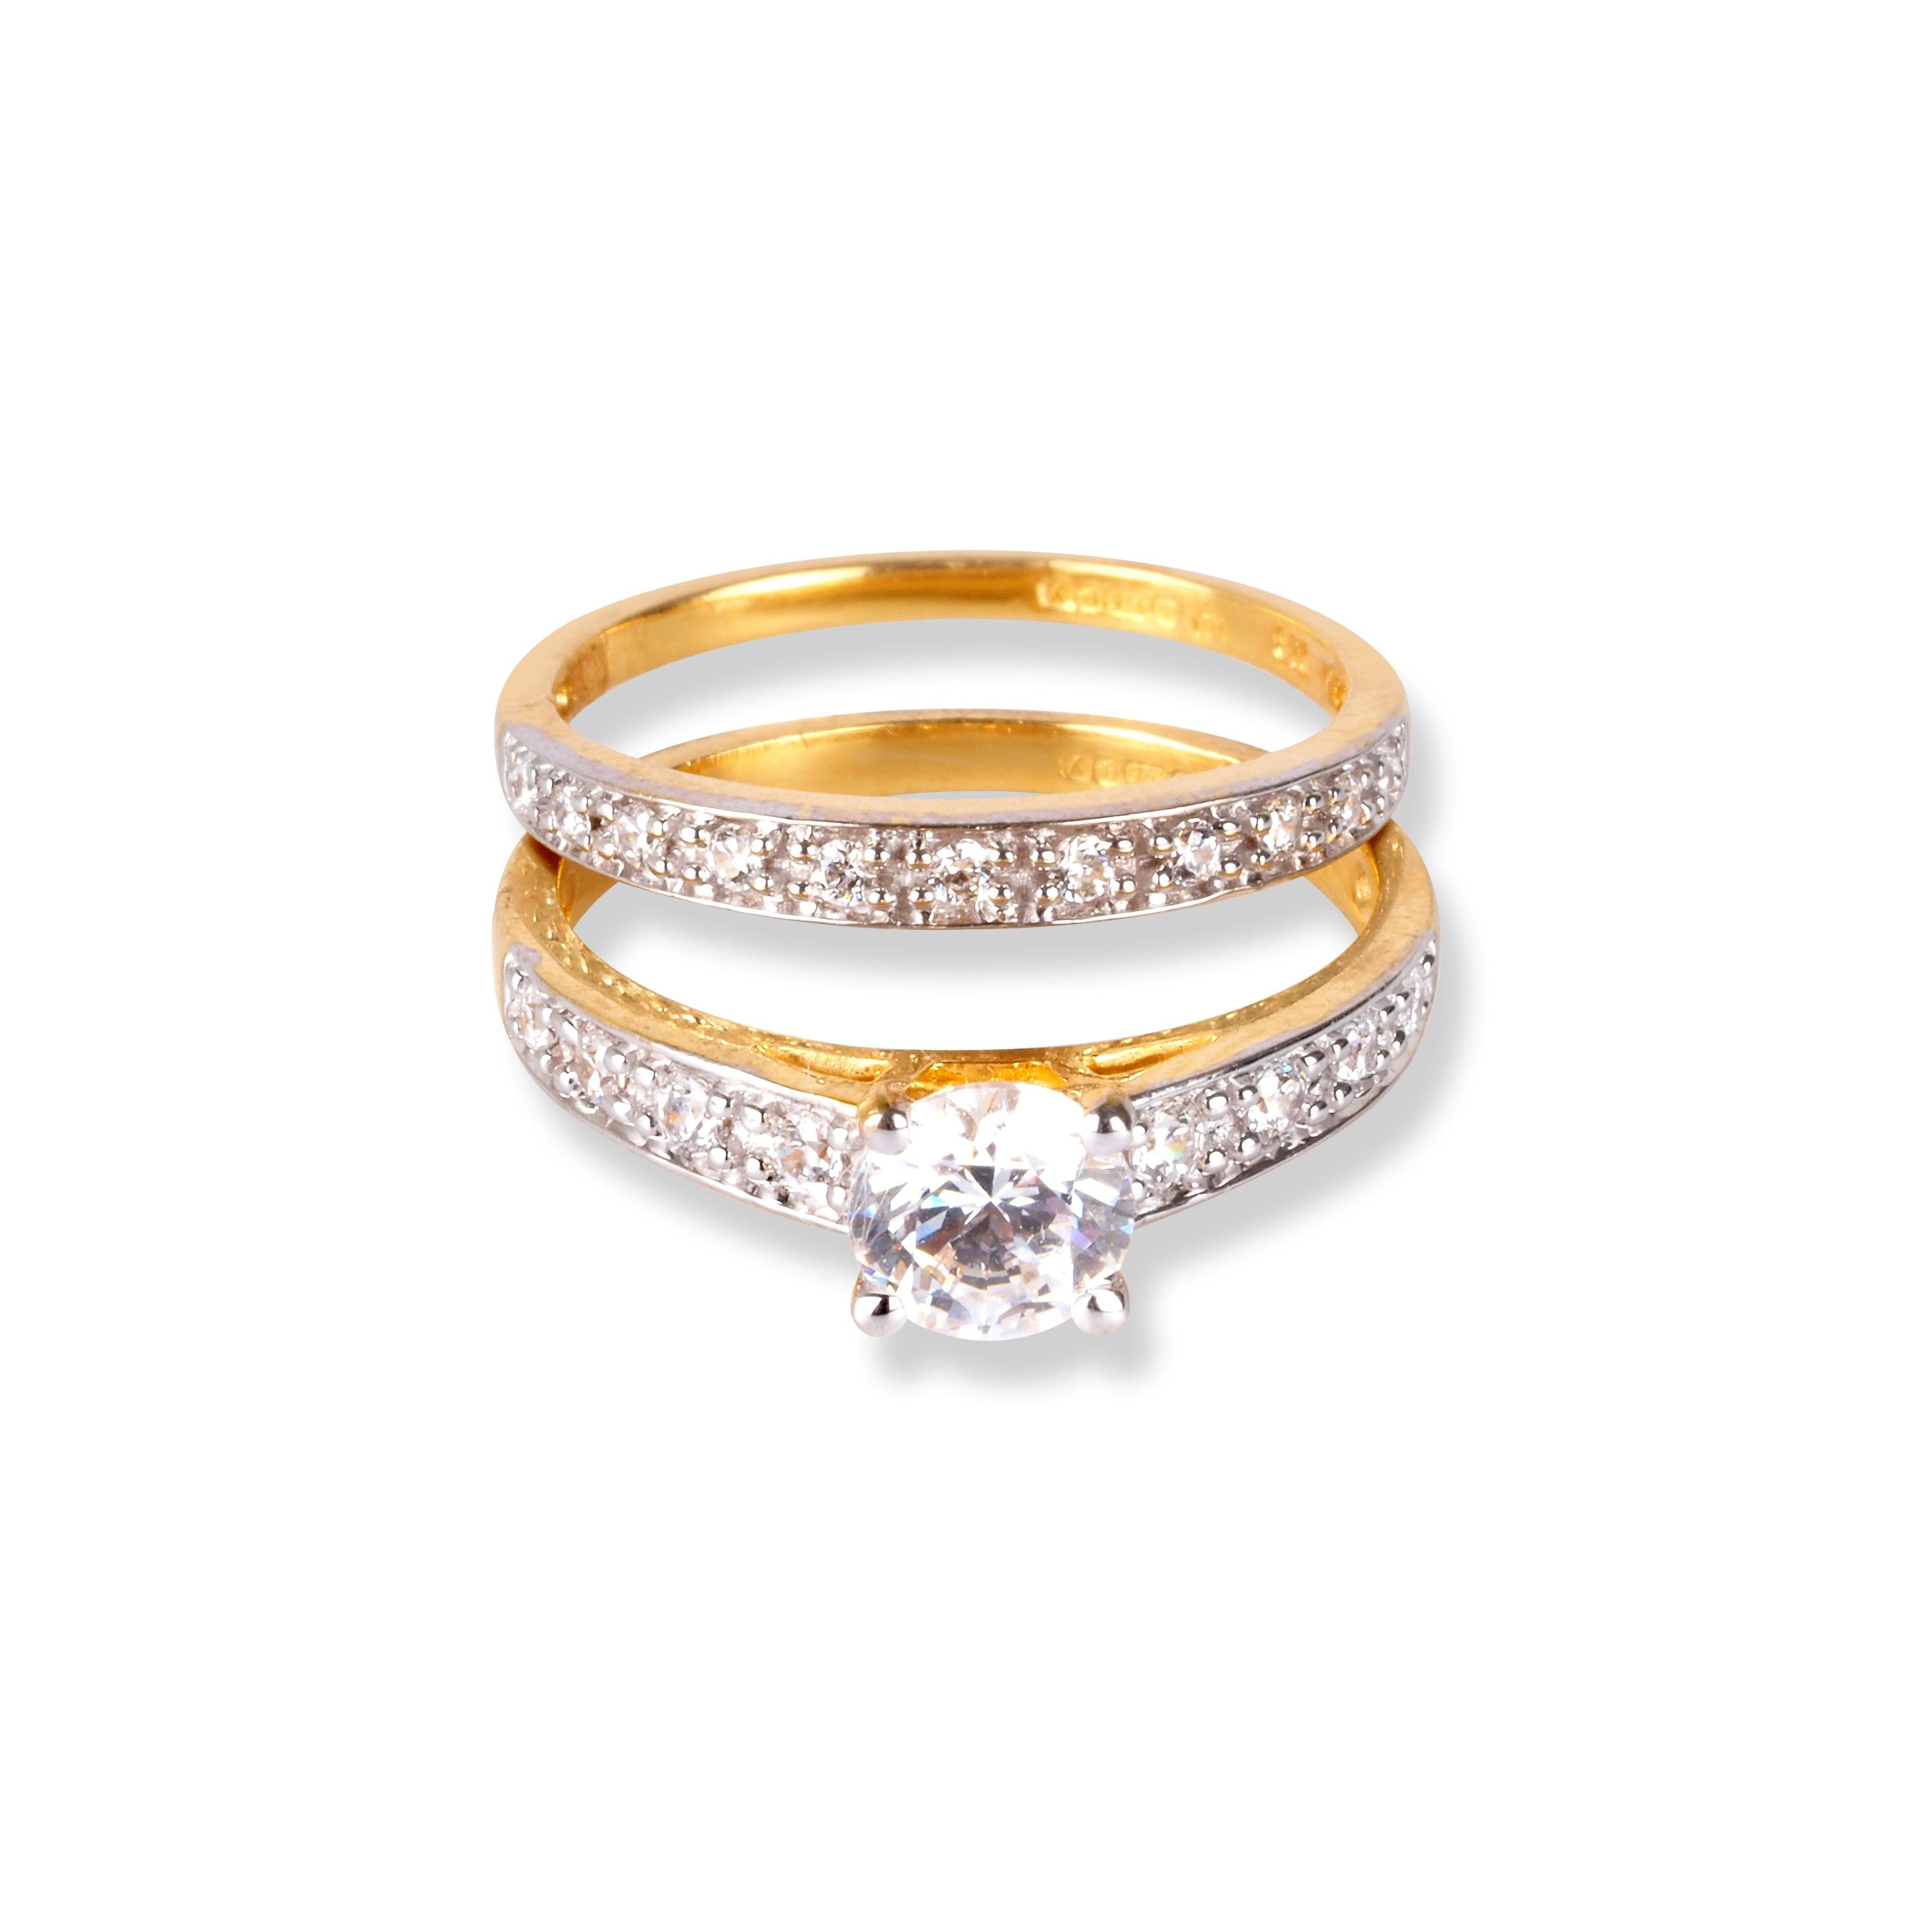 22ct Gold Engagement Ring and Wedding Band Set with Swarovski Zirconia Stones LR-6632 - Minar Jewellers